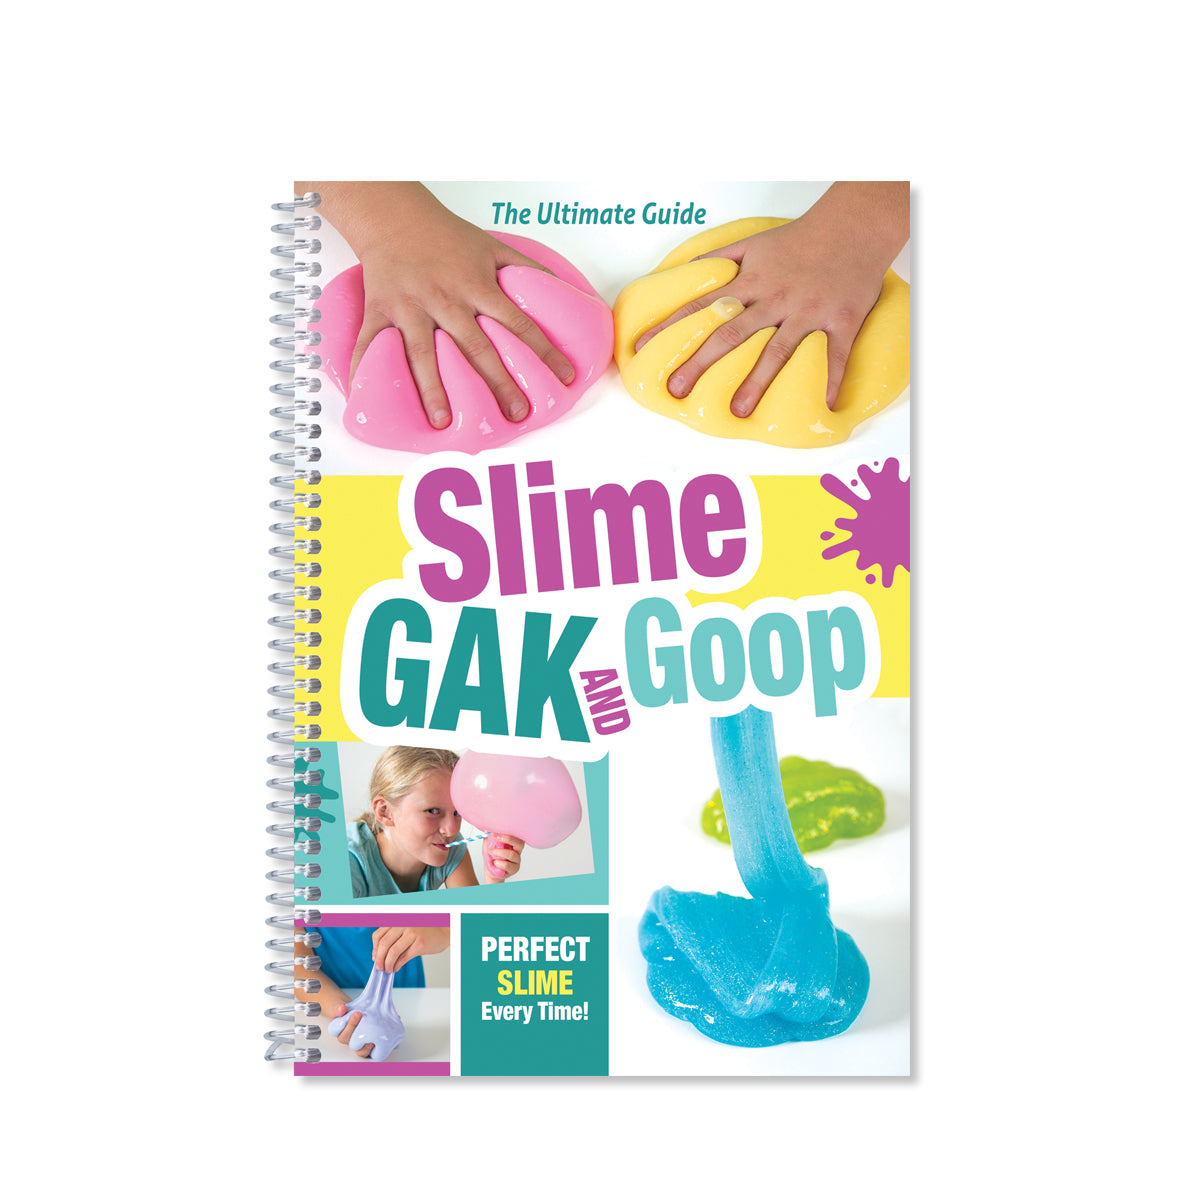 Cover of book titled "Slime Gak and Goop - Perfect Slime Every Time!"